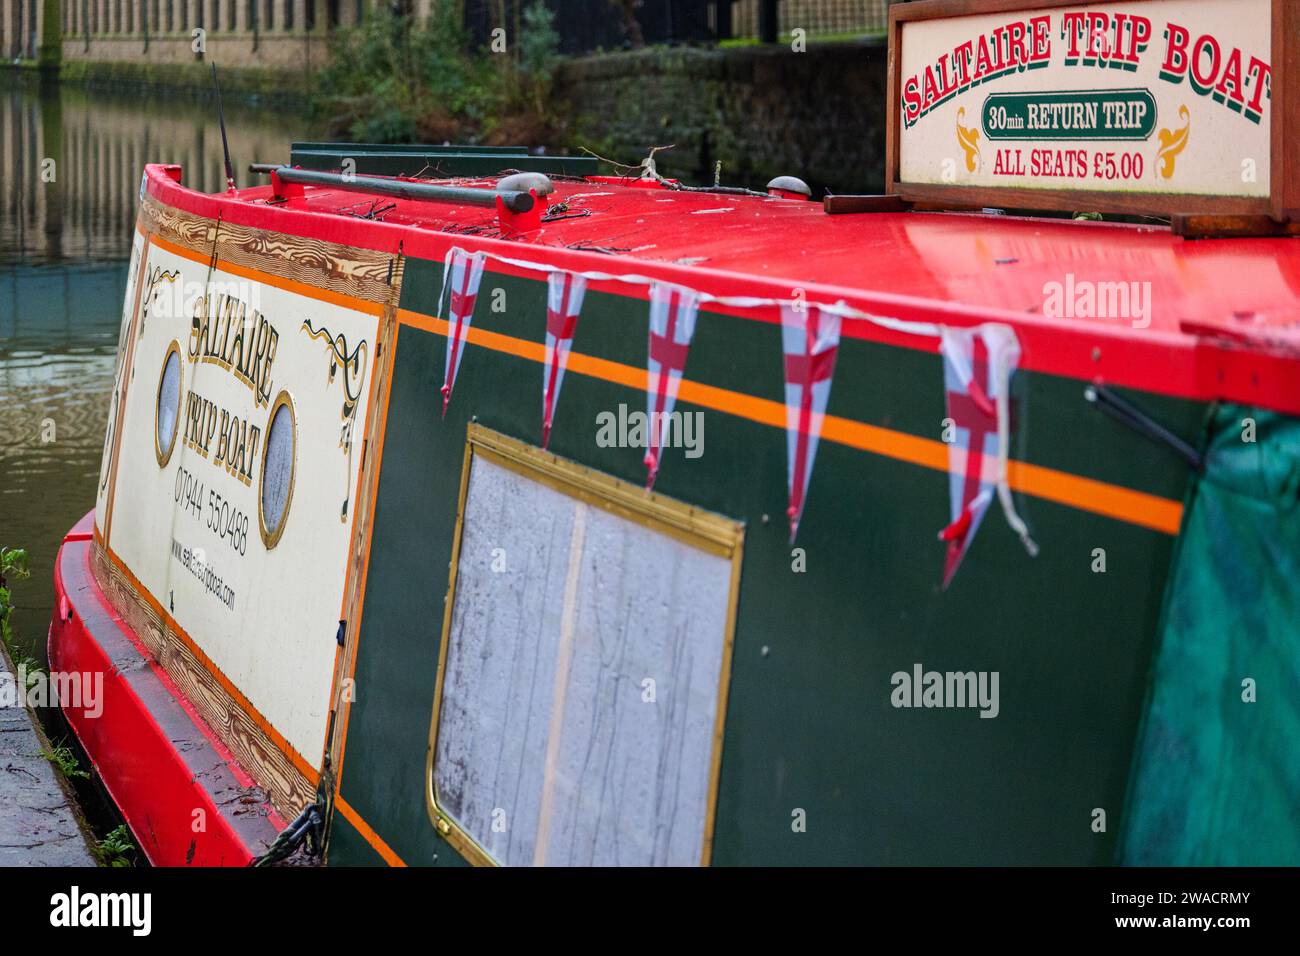 Narrowboat Titus a Saltaire Trip Boat on the Leeds Liverpool Canal Stock Photo